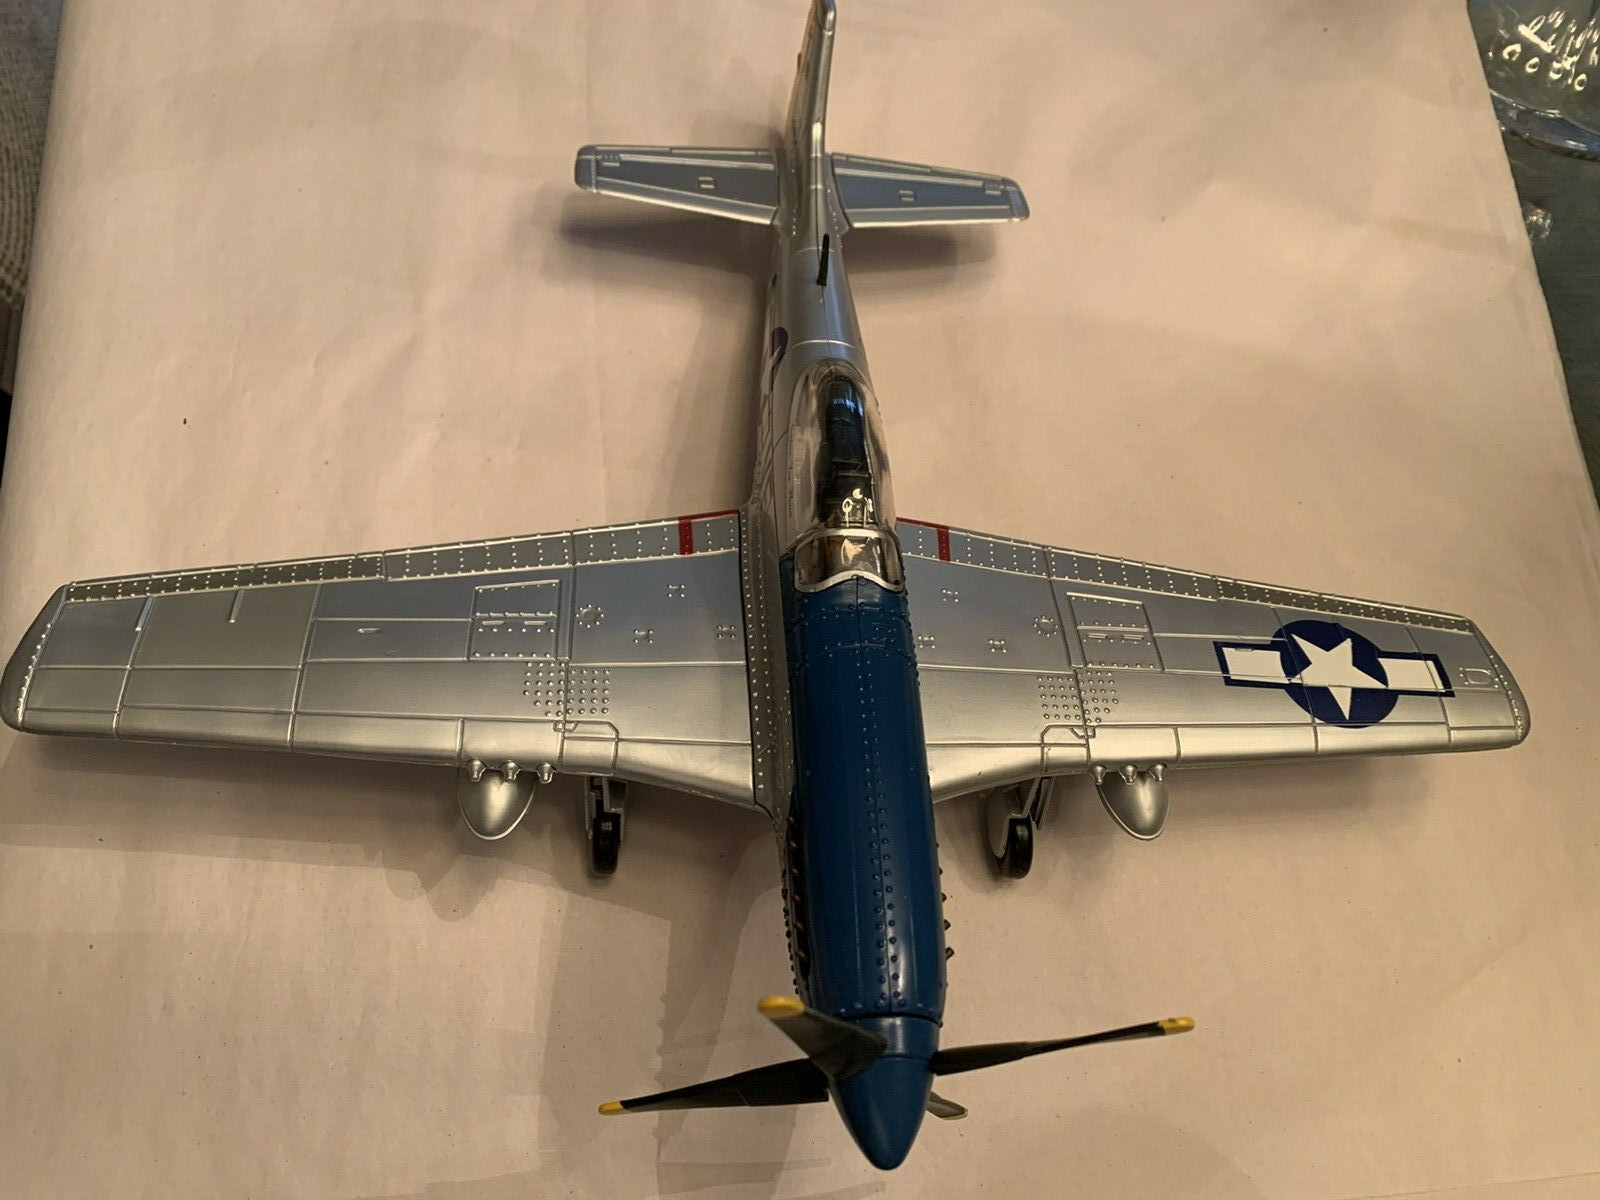 Ultimate Soldier 1:32 P-51 Mustang, Cpt. Phares, Samantha Payton, No. 20340